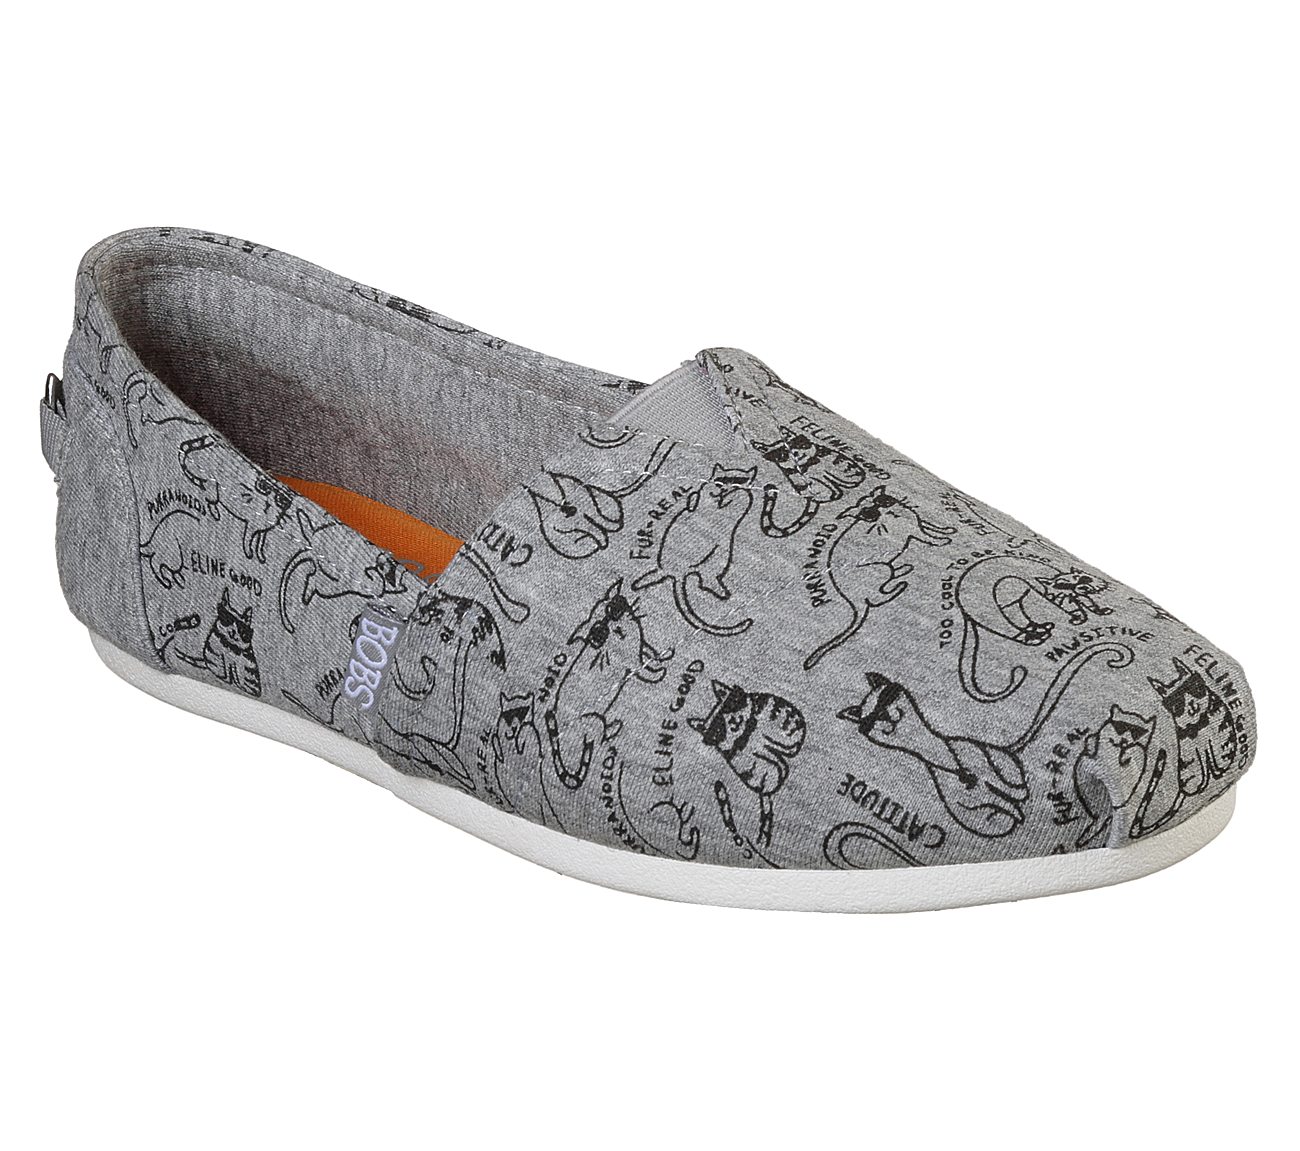 Buy SKECHERS BOBS Plush - Meow Moods BOBS Shoes